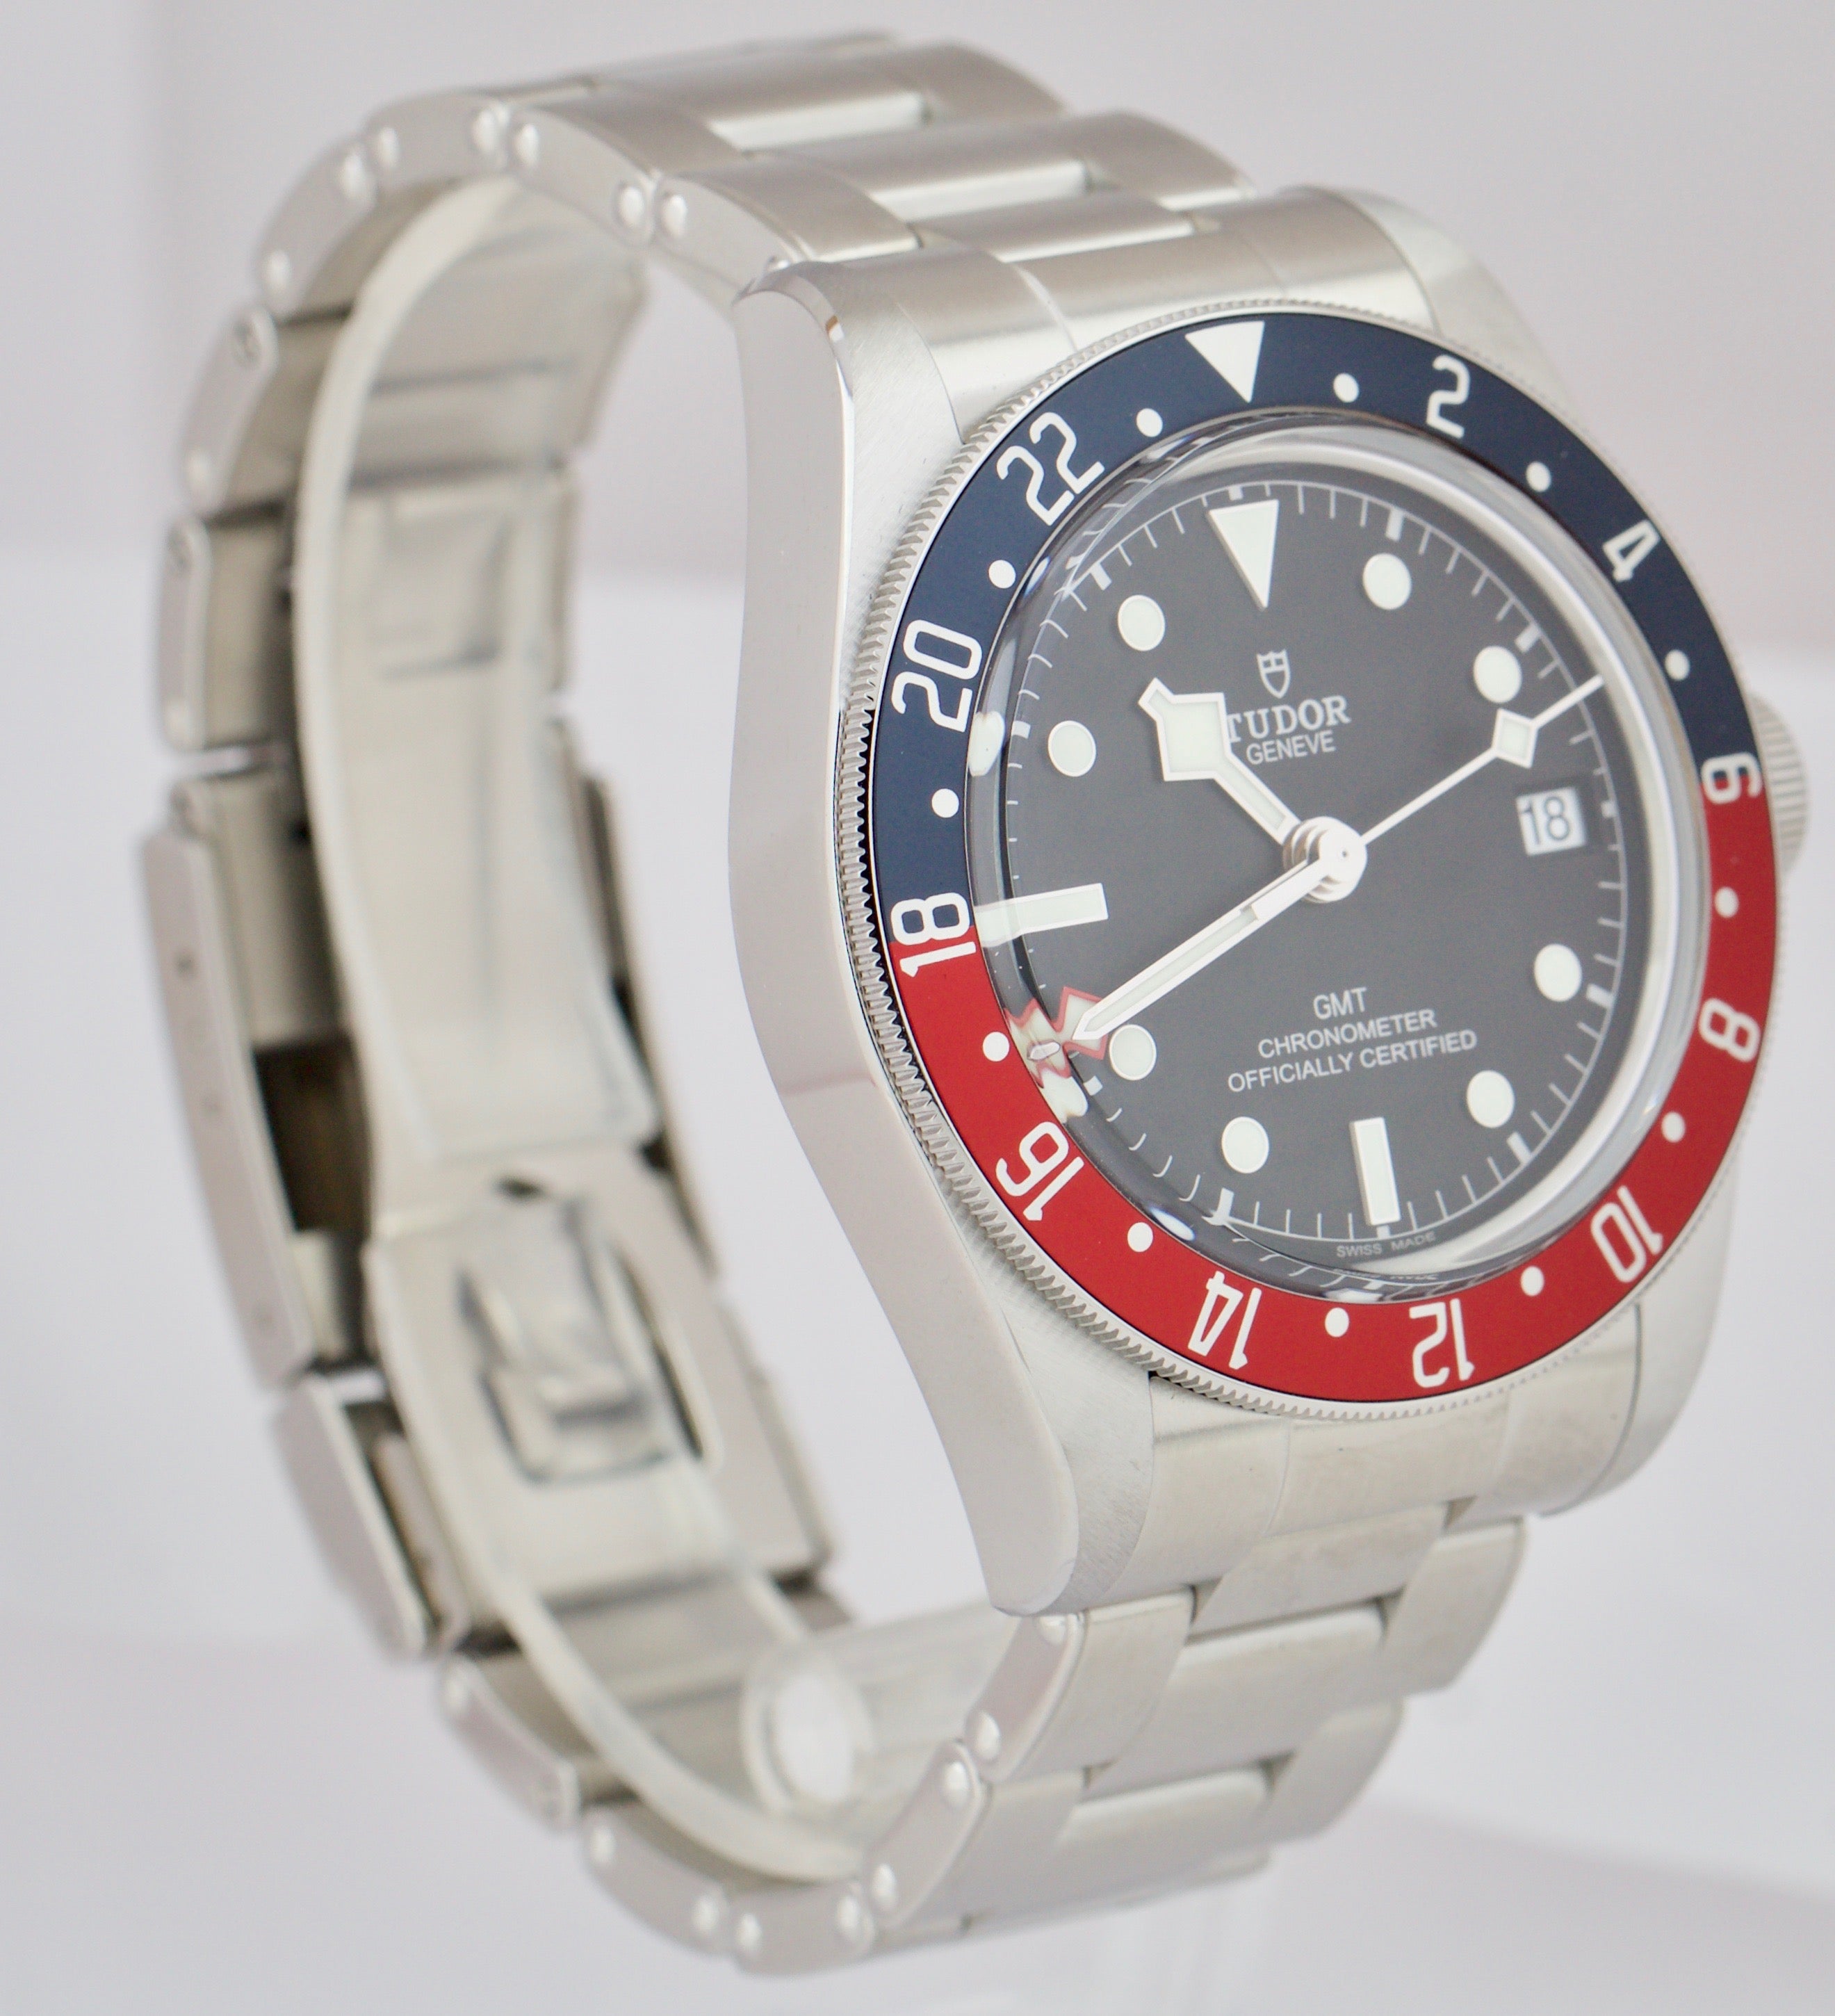 BRAND NEW Tudor Black Bay GMT Pepsi 41mm Stainless Black Date Watch 79830RB